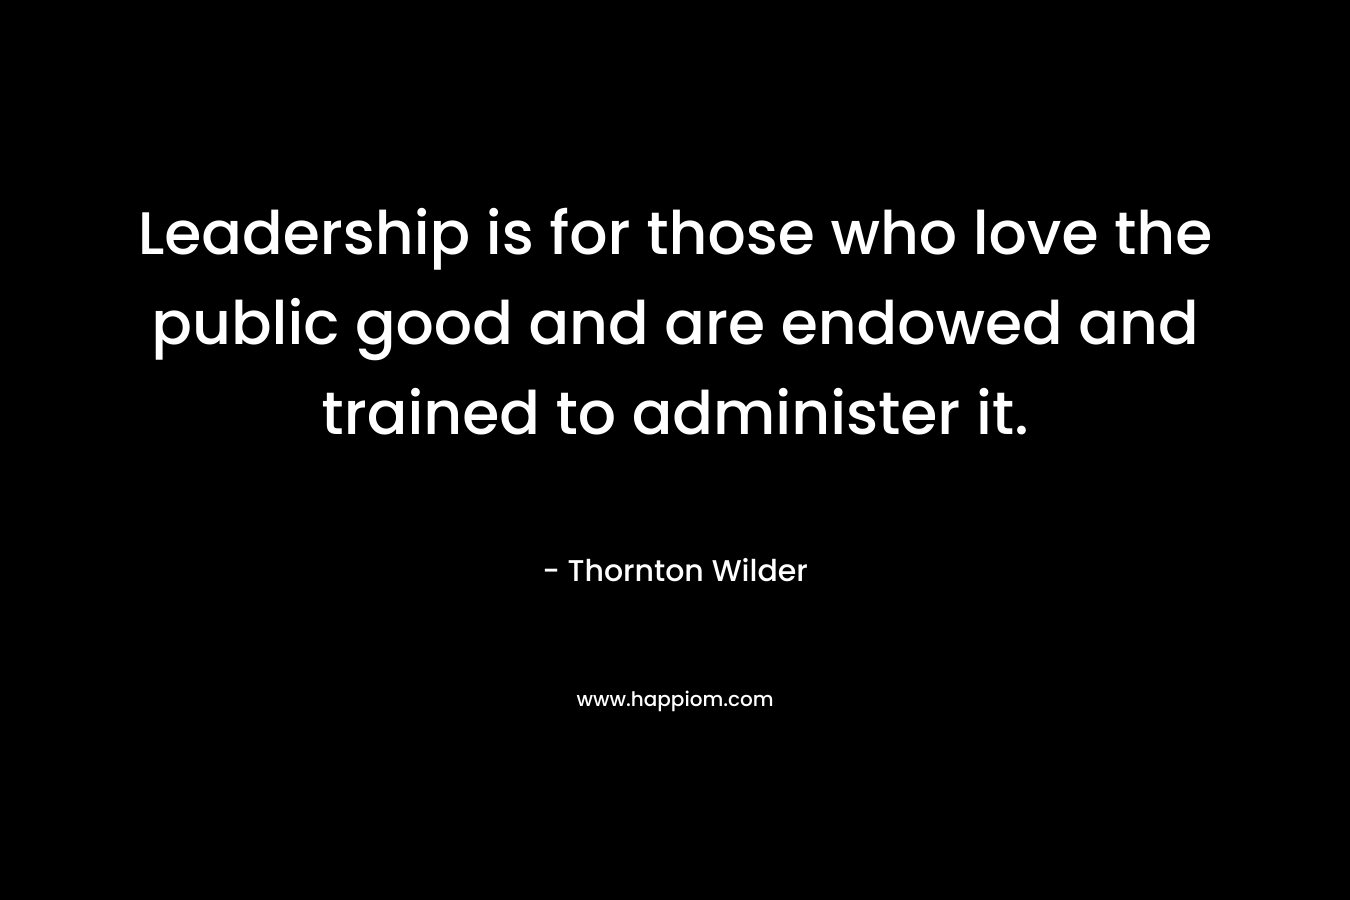 Leadership is for those who love the public good and are endowed and trained to administer it. – Thornton Wilder